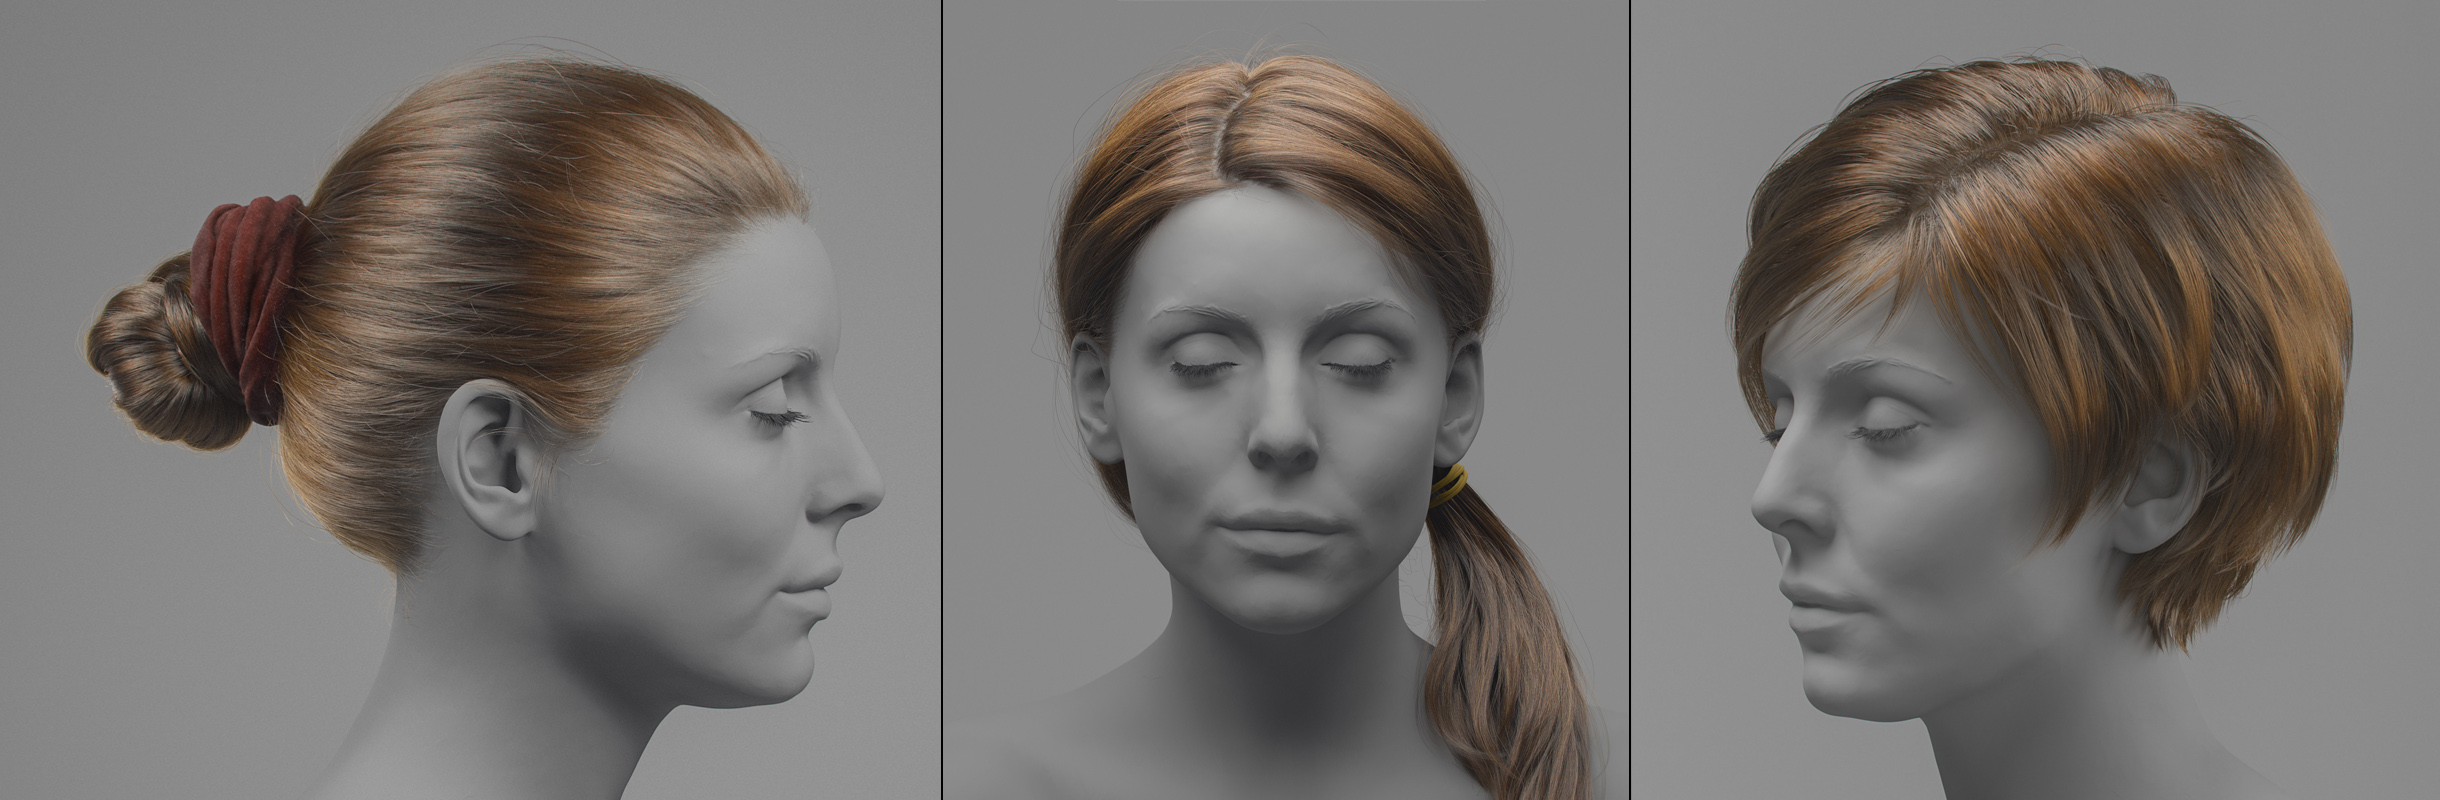 Electronics | Free Full-Text | Development of a Hairstyle Conversion System  Based on Mask R-CNN